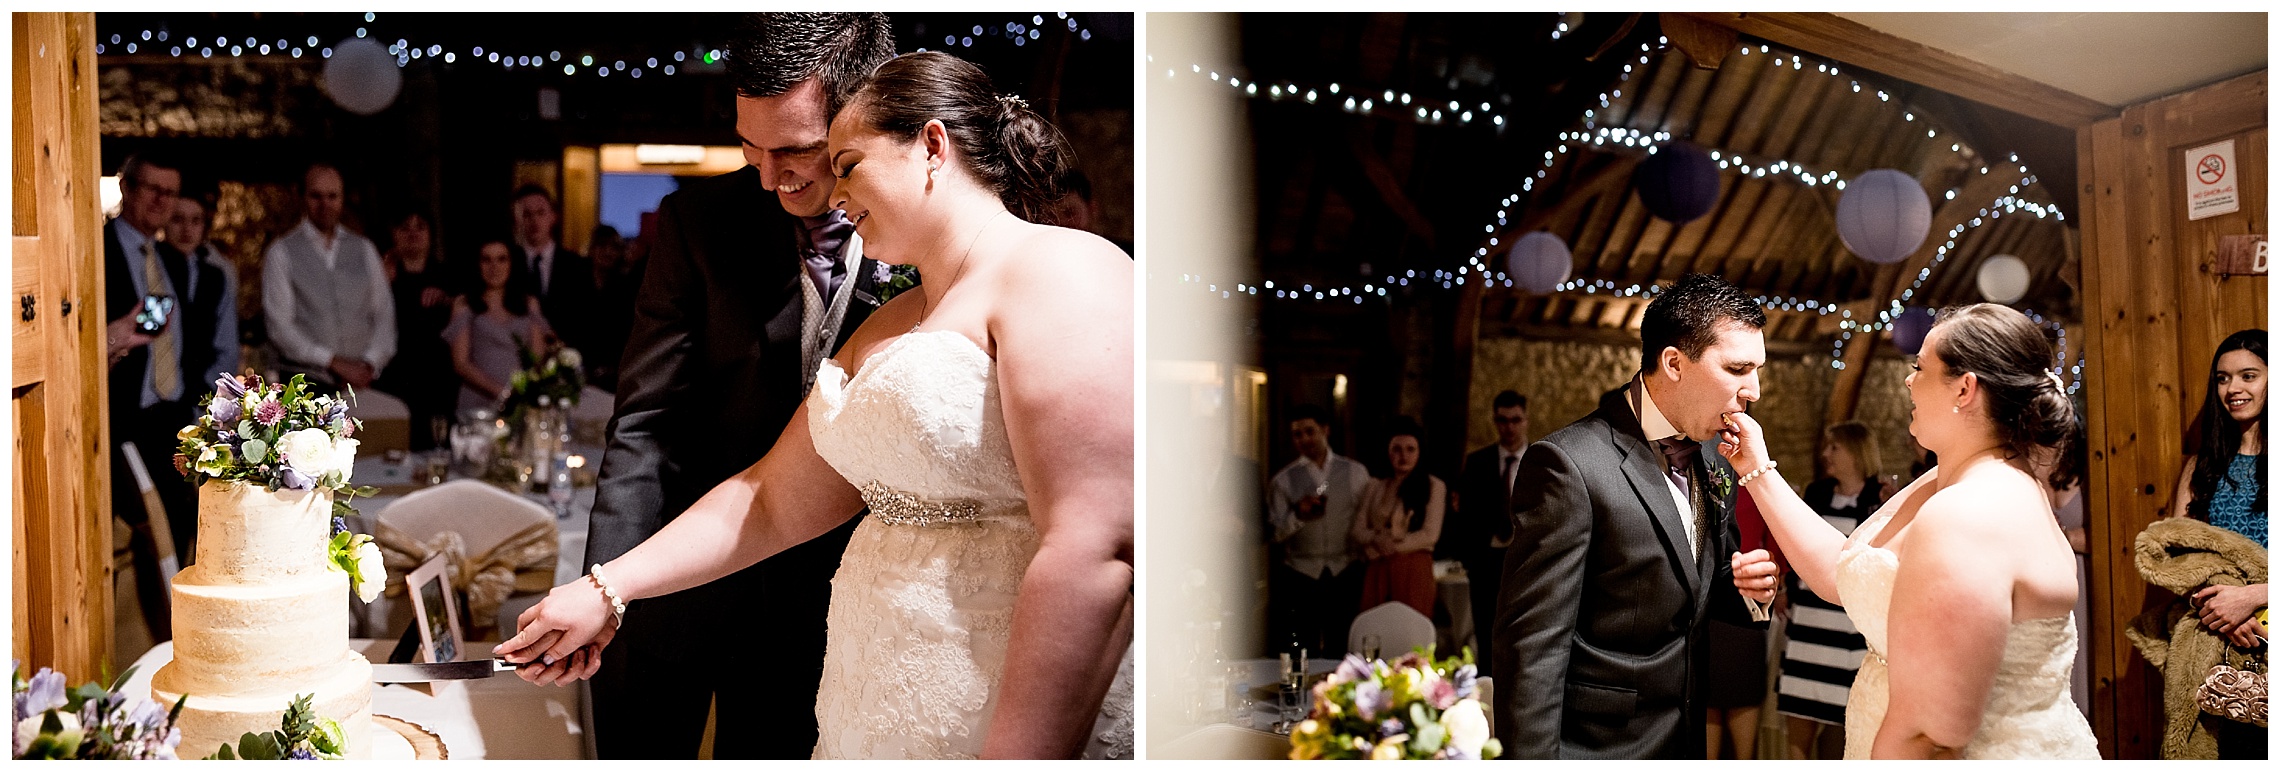 cutting the wedding cake with bride and groom at notley tythe barn wedding